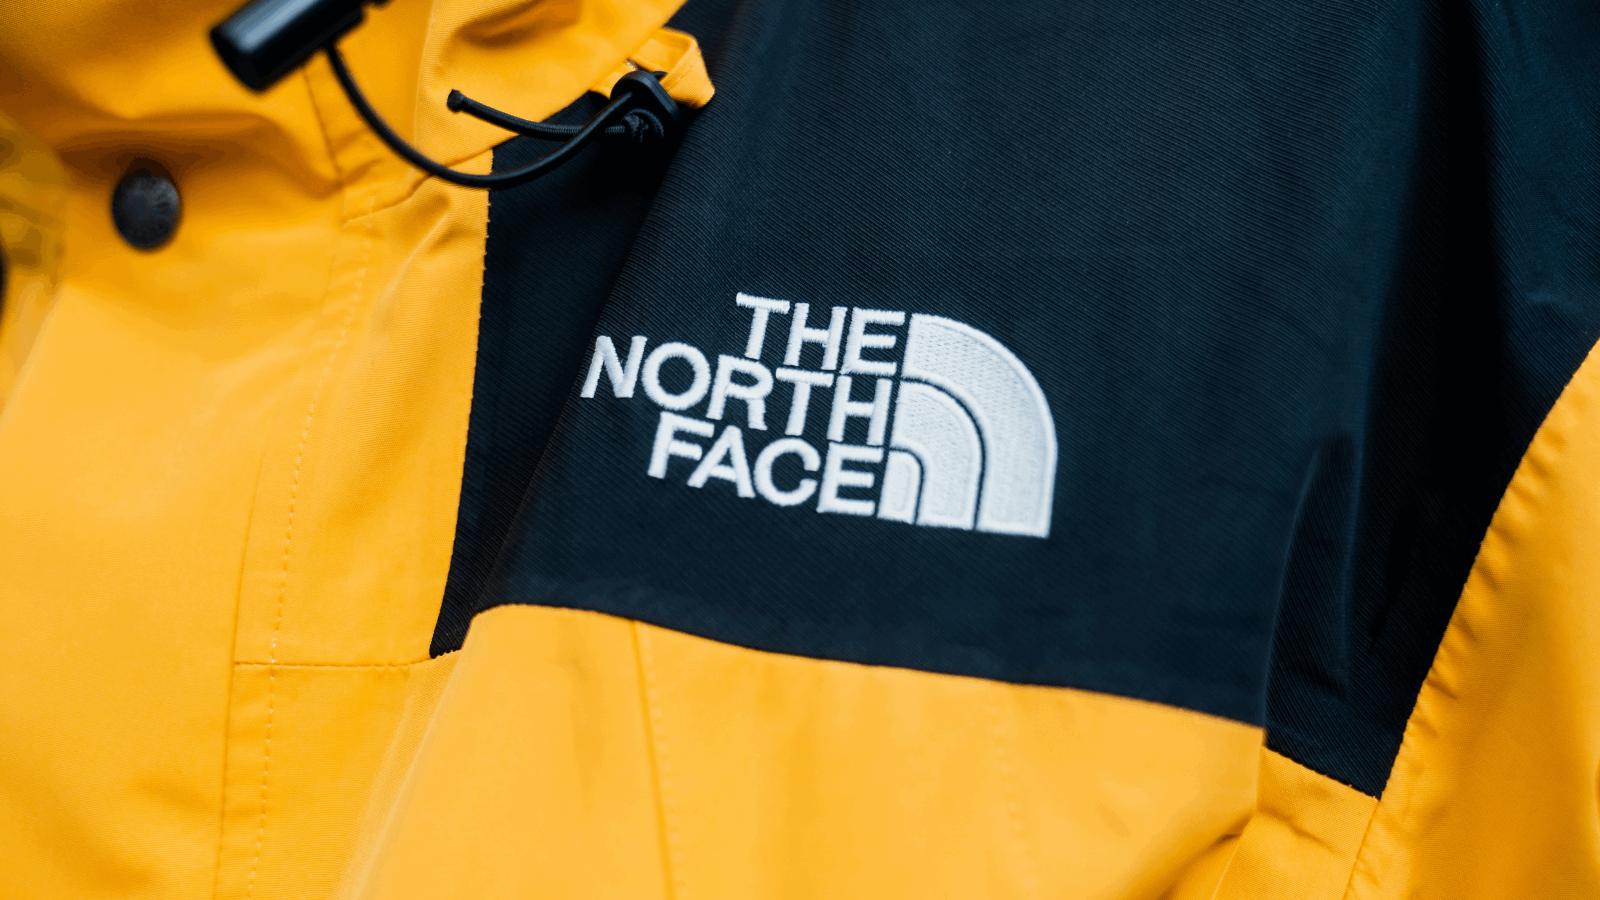 200,000 North Face accounts hacked in credential stuffing attack